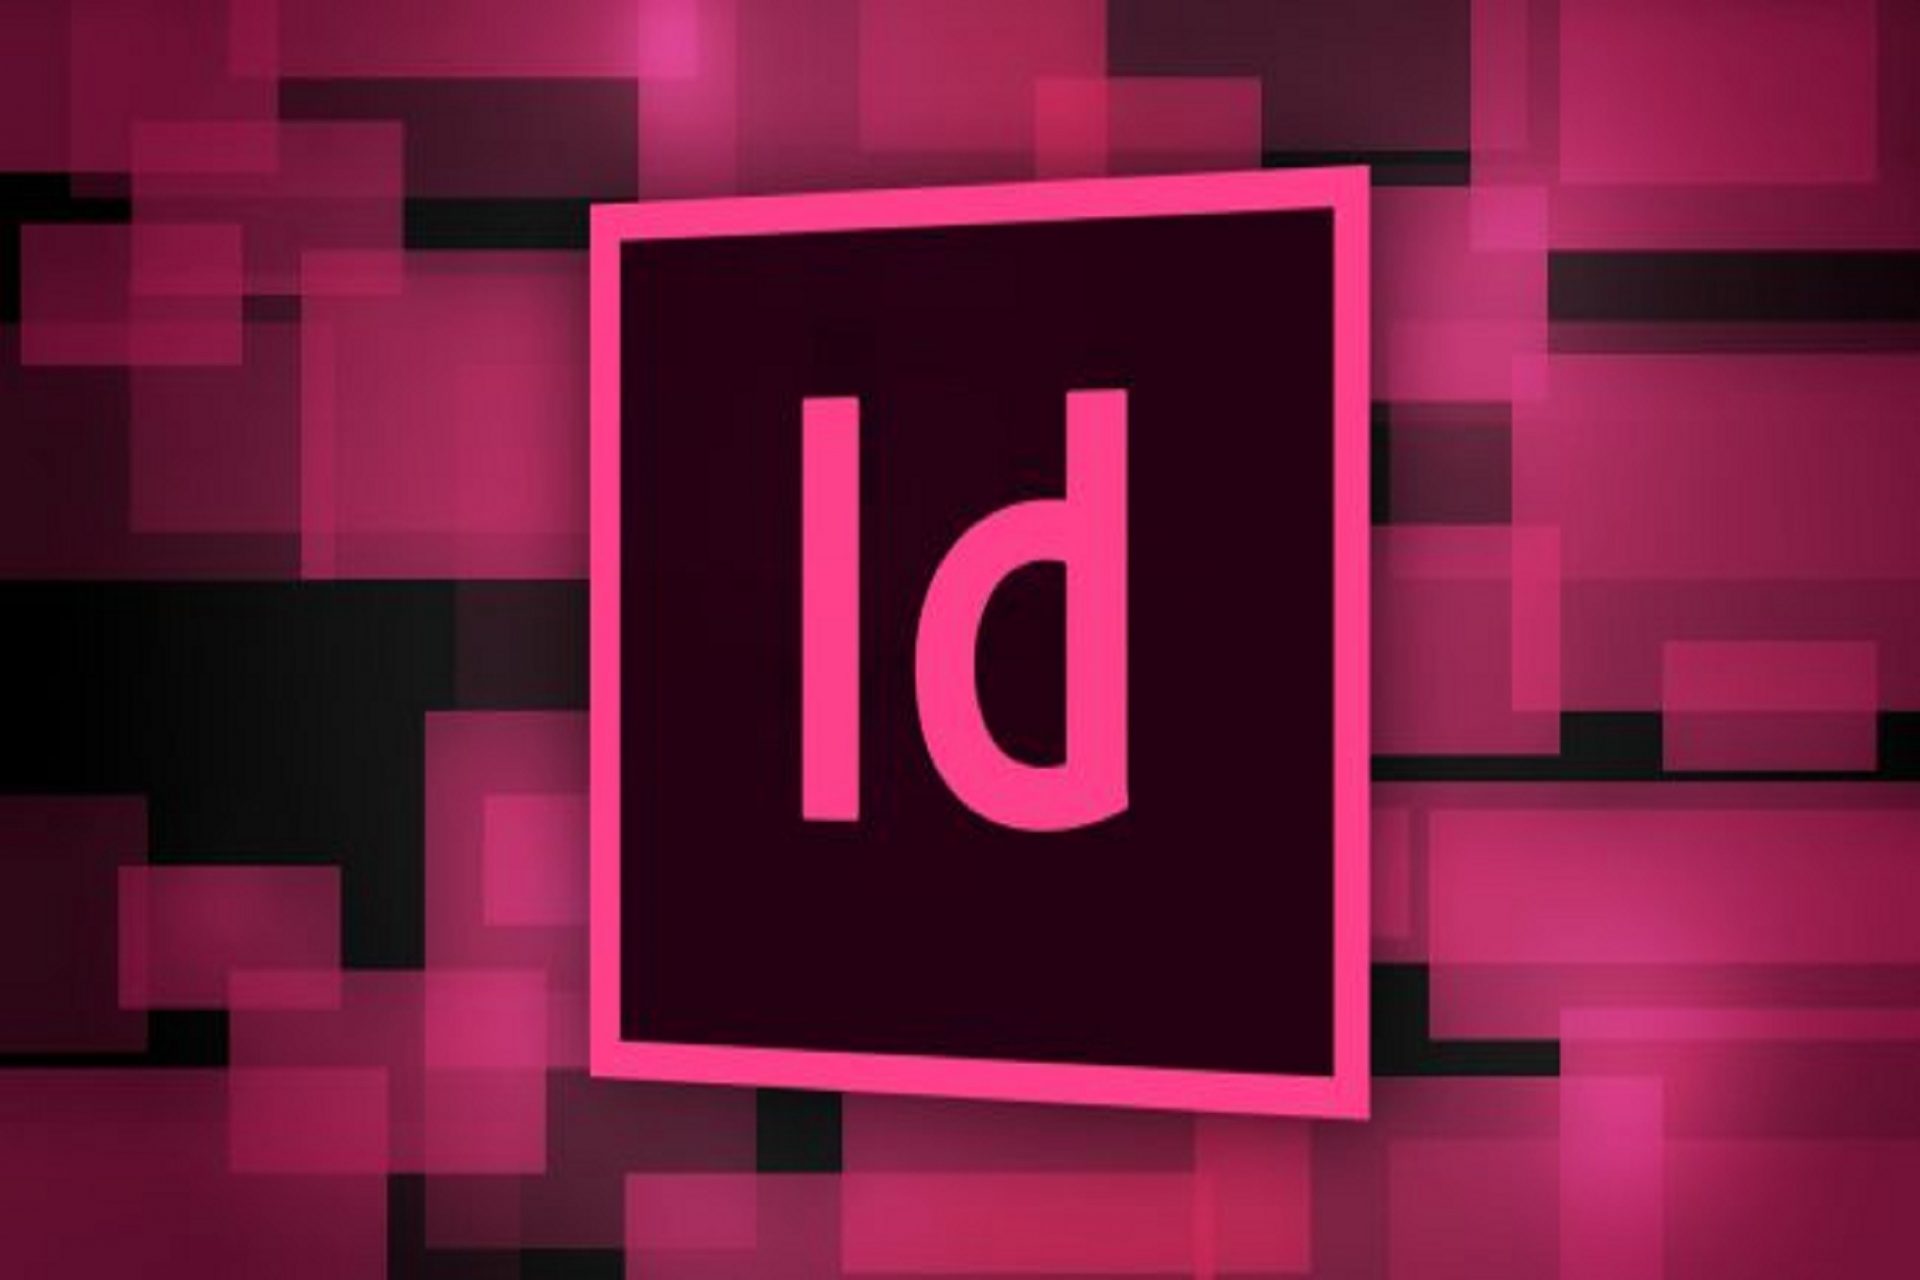 indesign cc 2017 lost my fitting icons